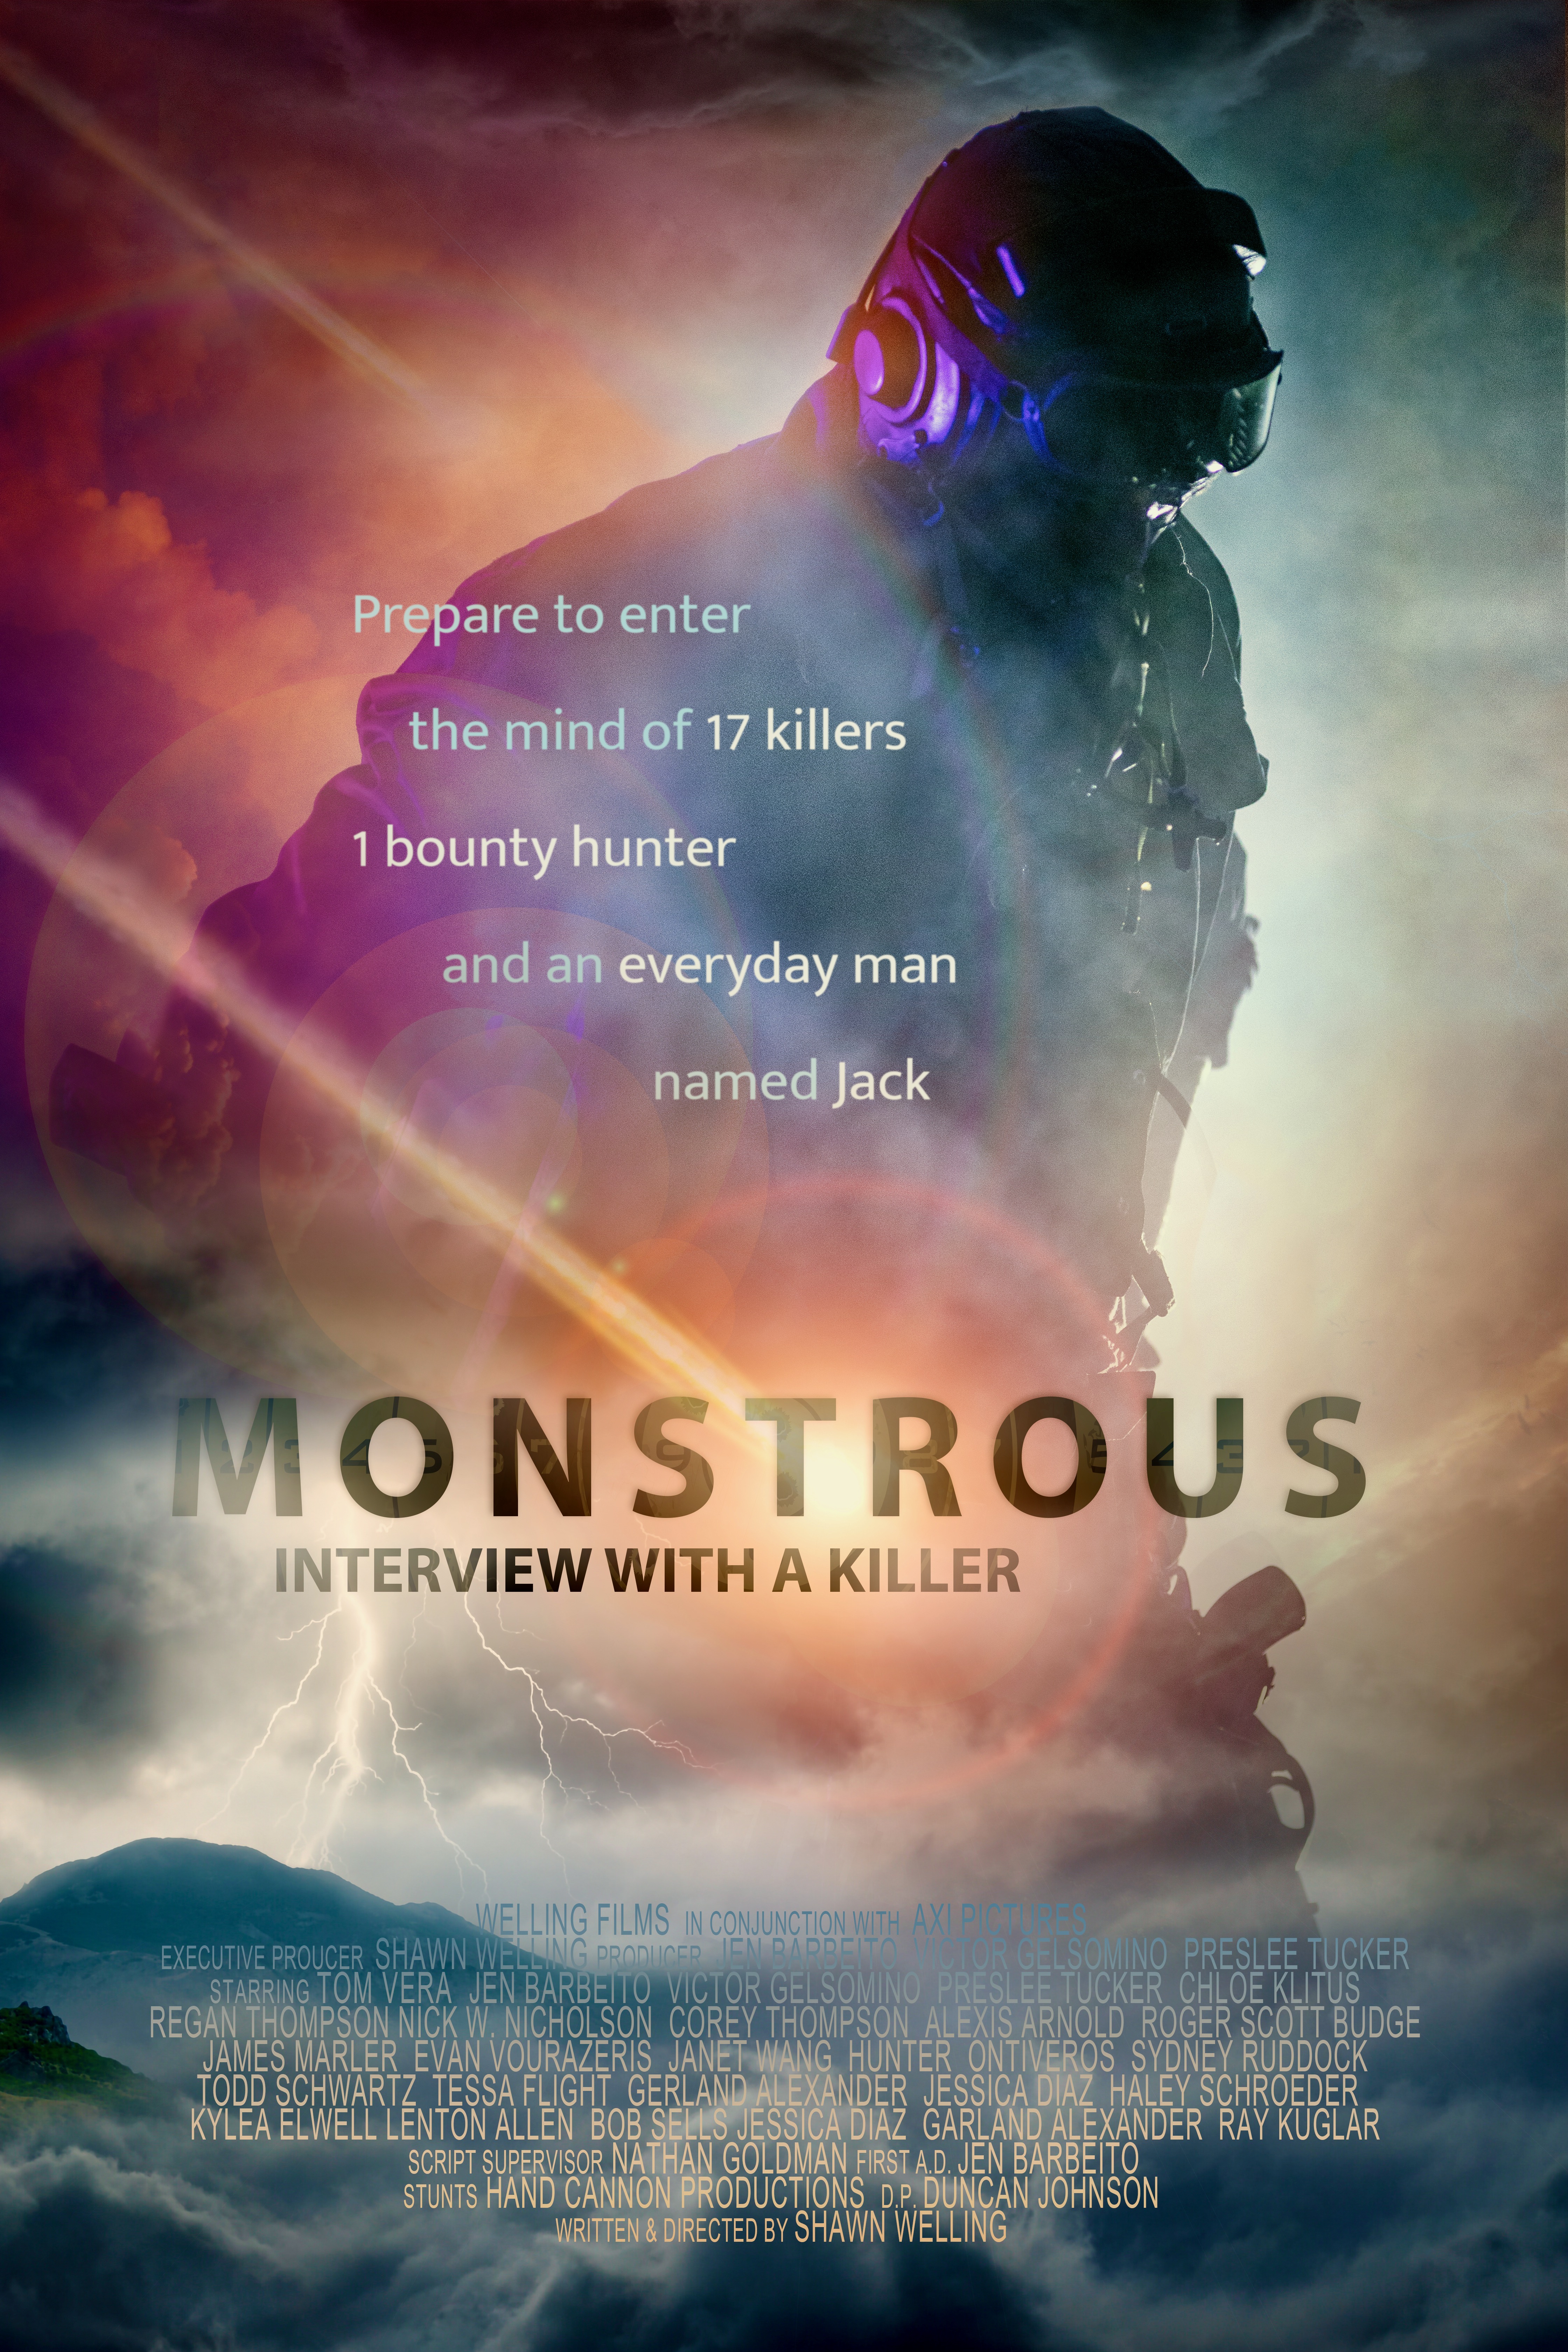 Monstrous: Interview with a Killer (2022)